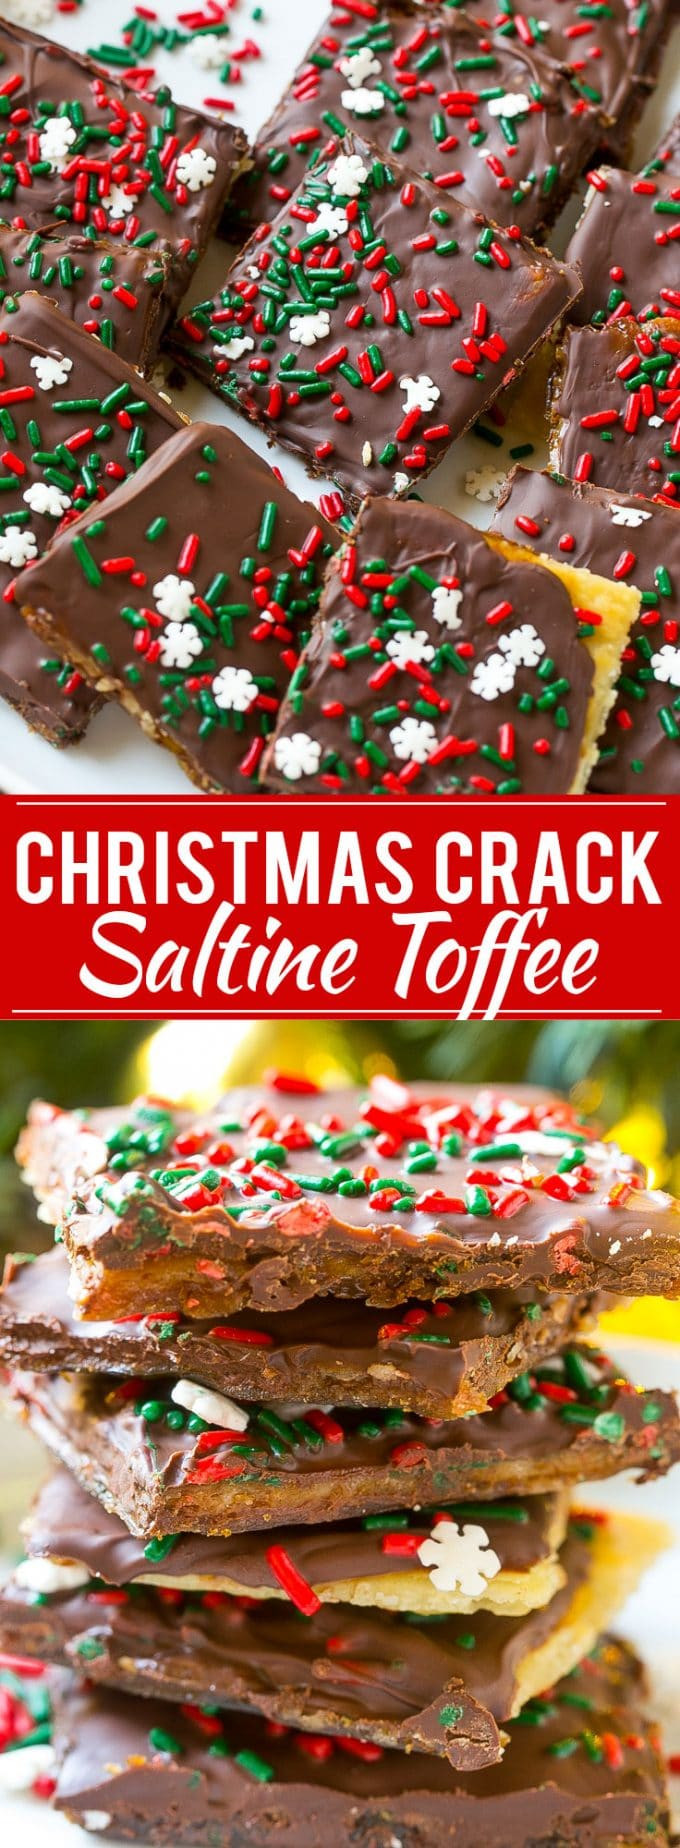 Christmas Crack Candy Recipe
 Christmas Crack Saltine Toffee Dinner at the Zoo